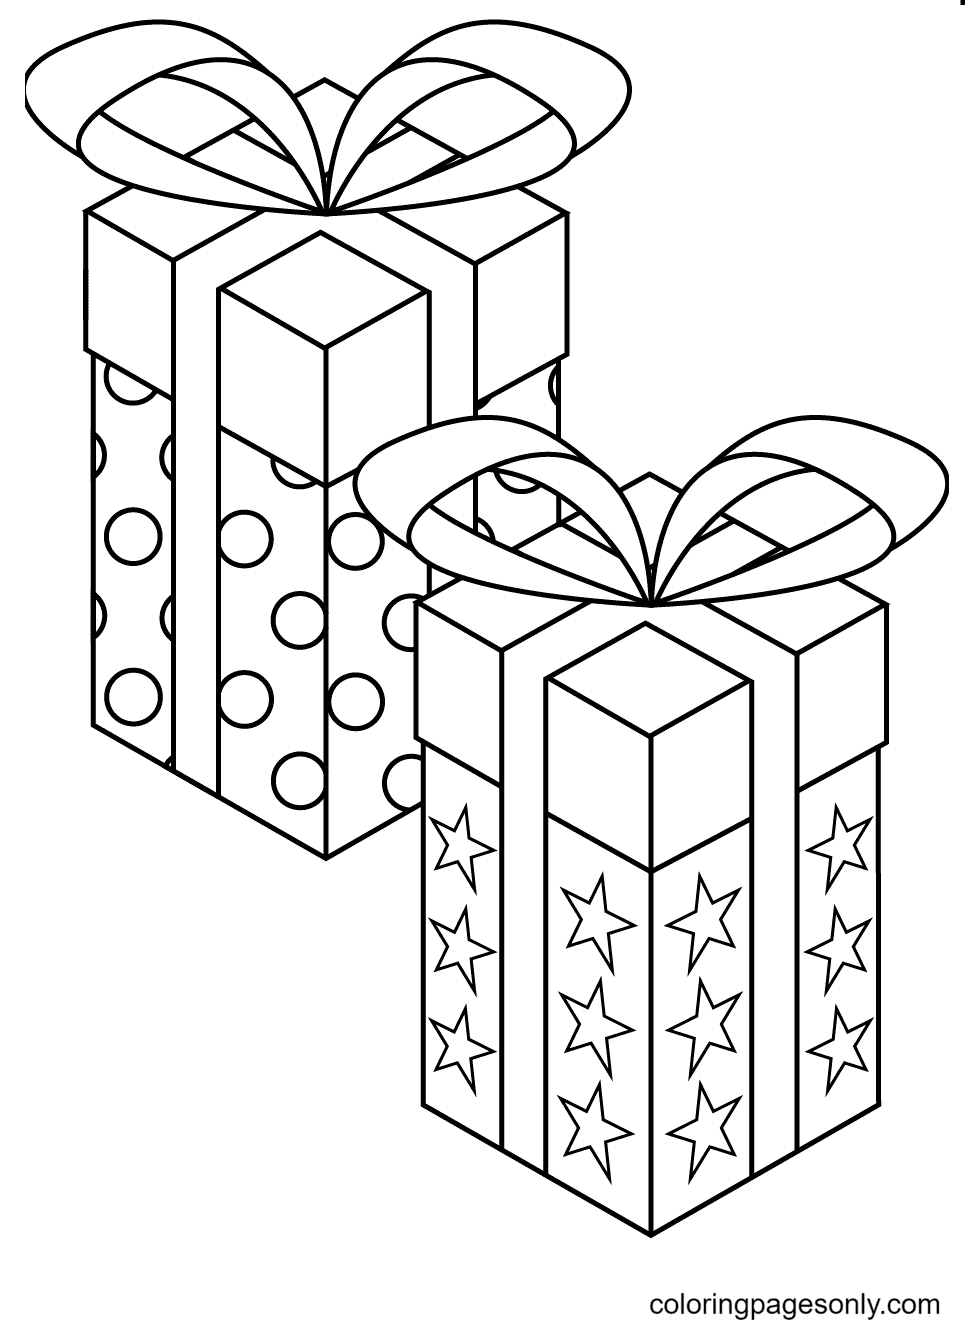 Pretty Pair of Christmas Presents Coloring Pages